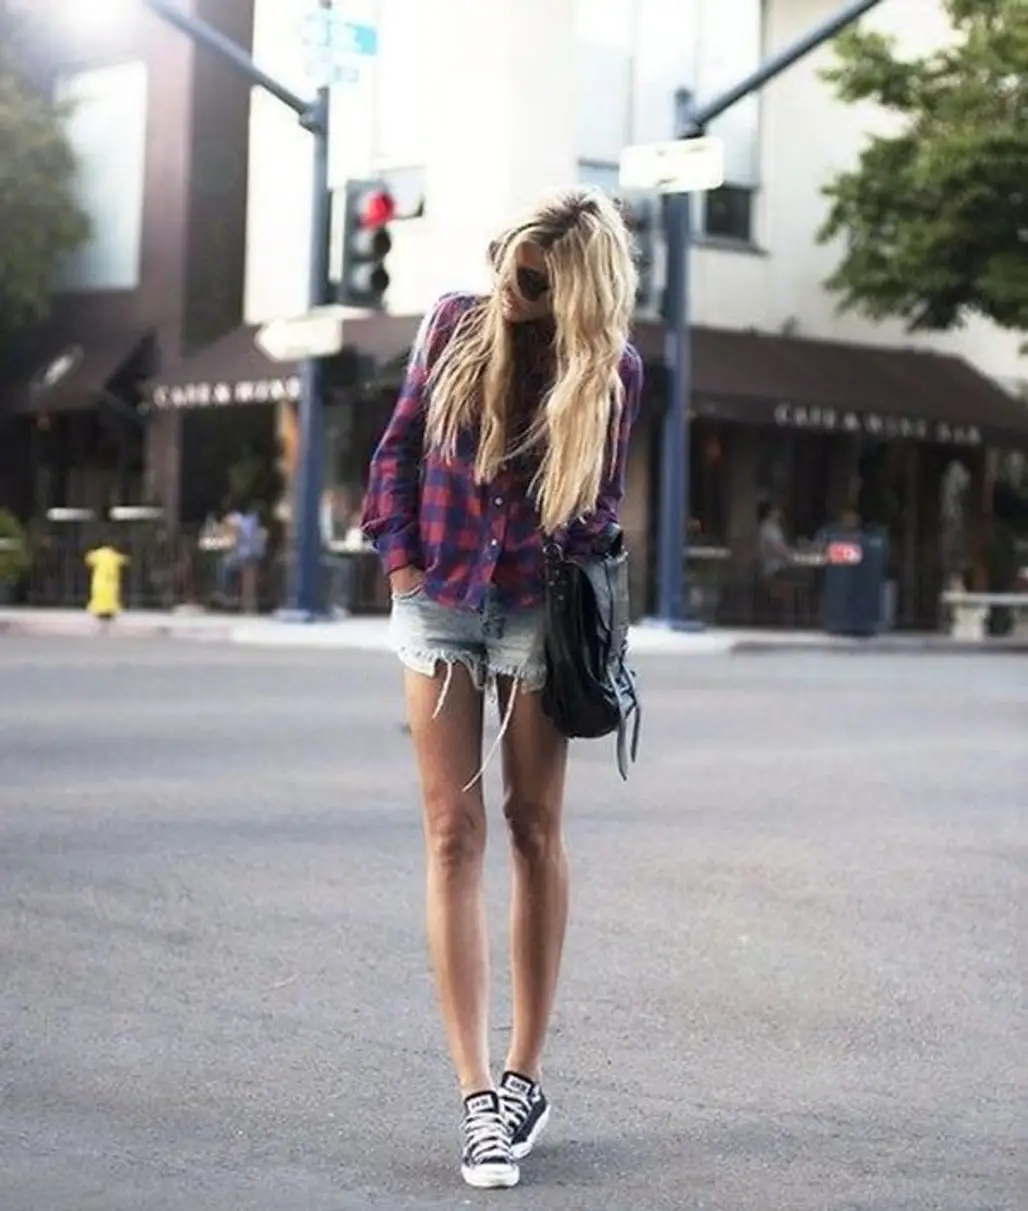 Distressed Shorts and Plaid Shirts Are the Perfect Match